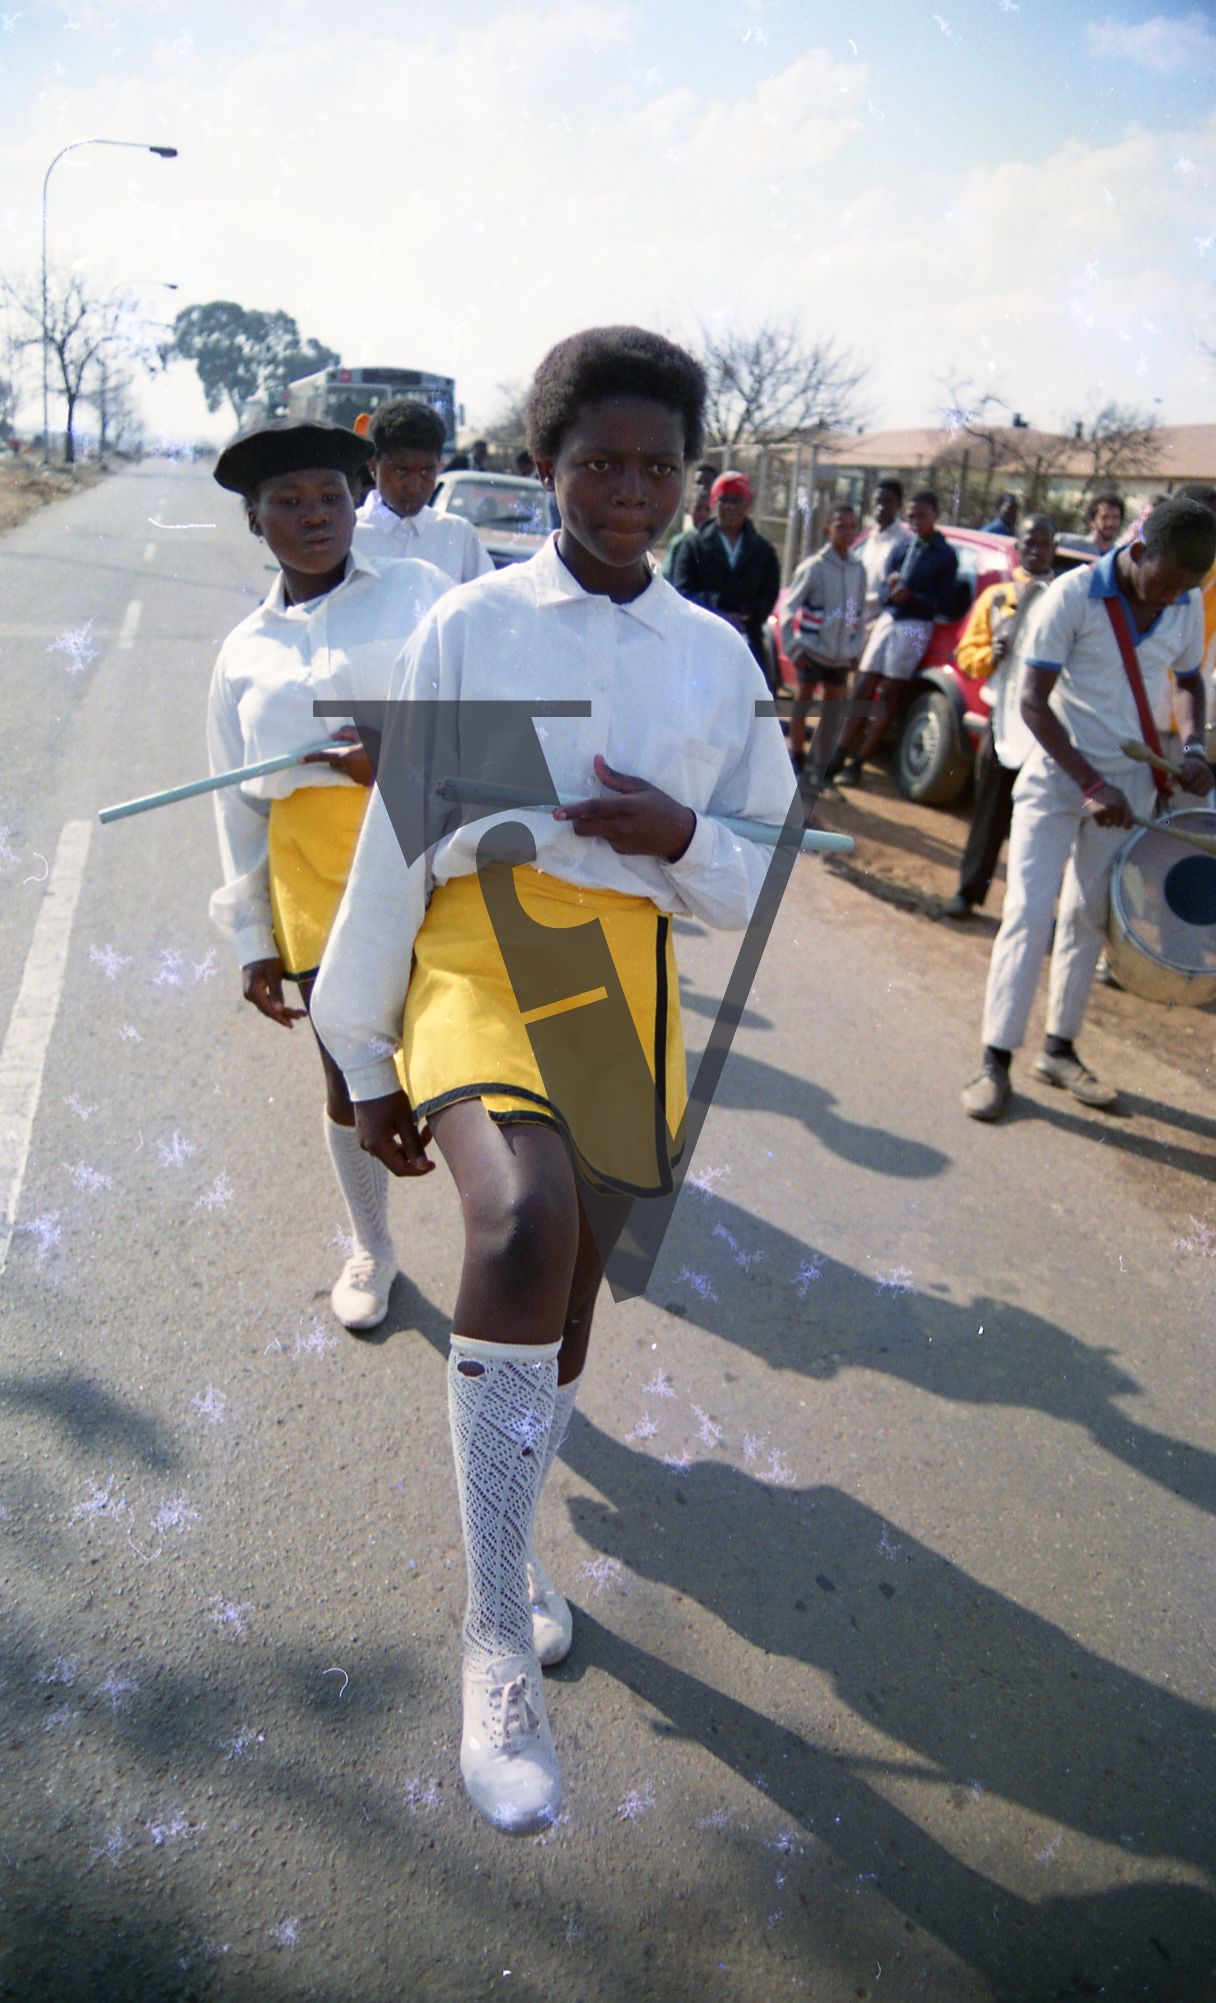 South Africa, girls marching.